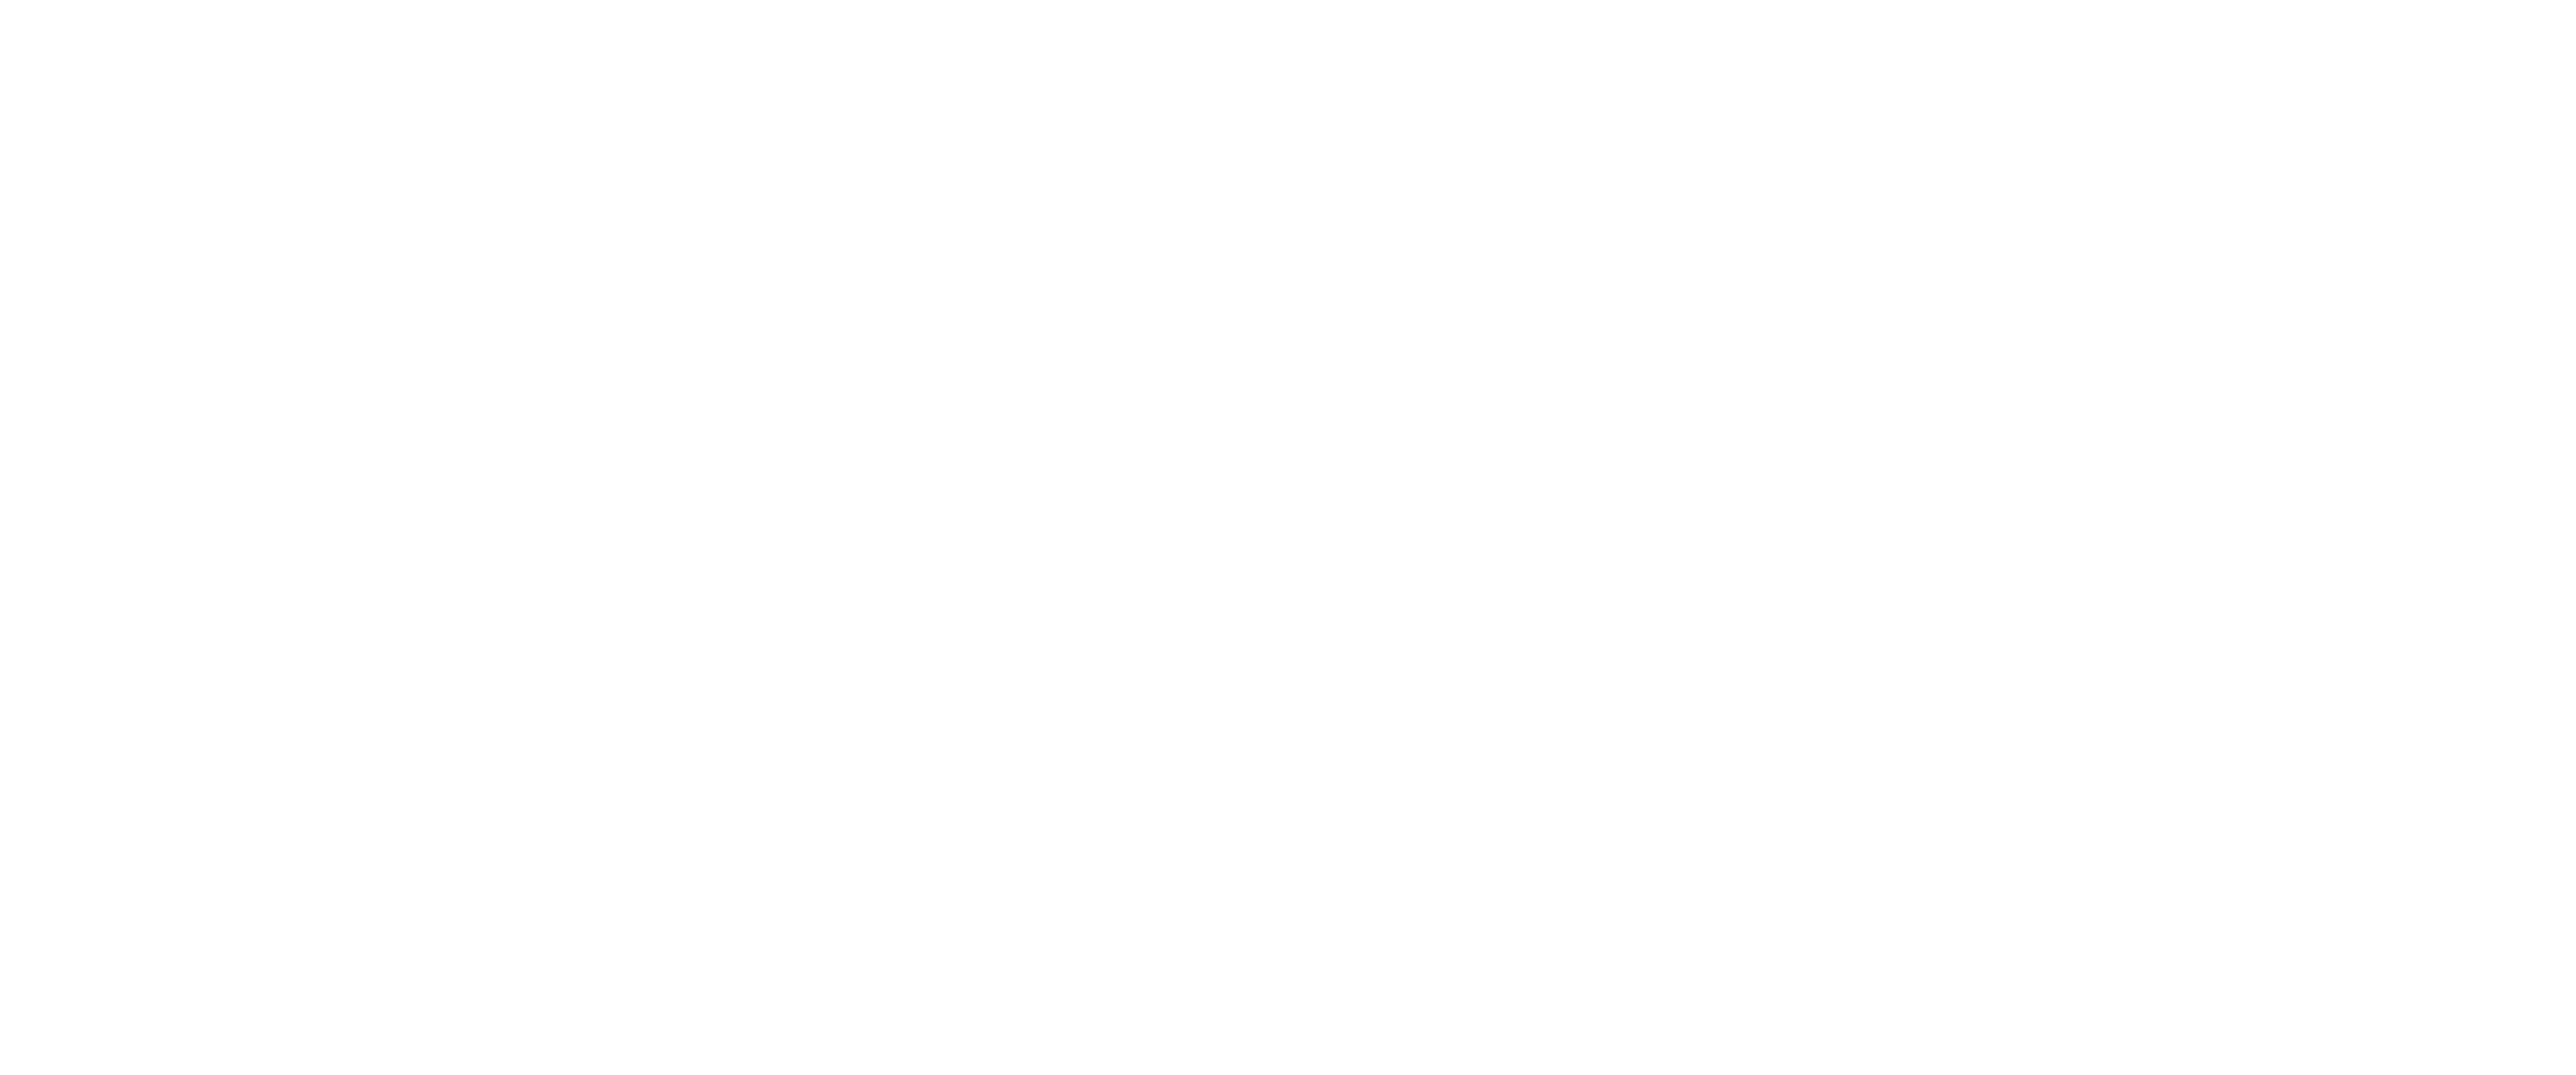 Lace clipart wallpaper. Image file formats lossless